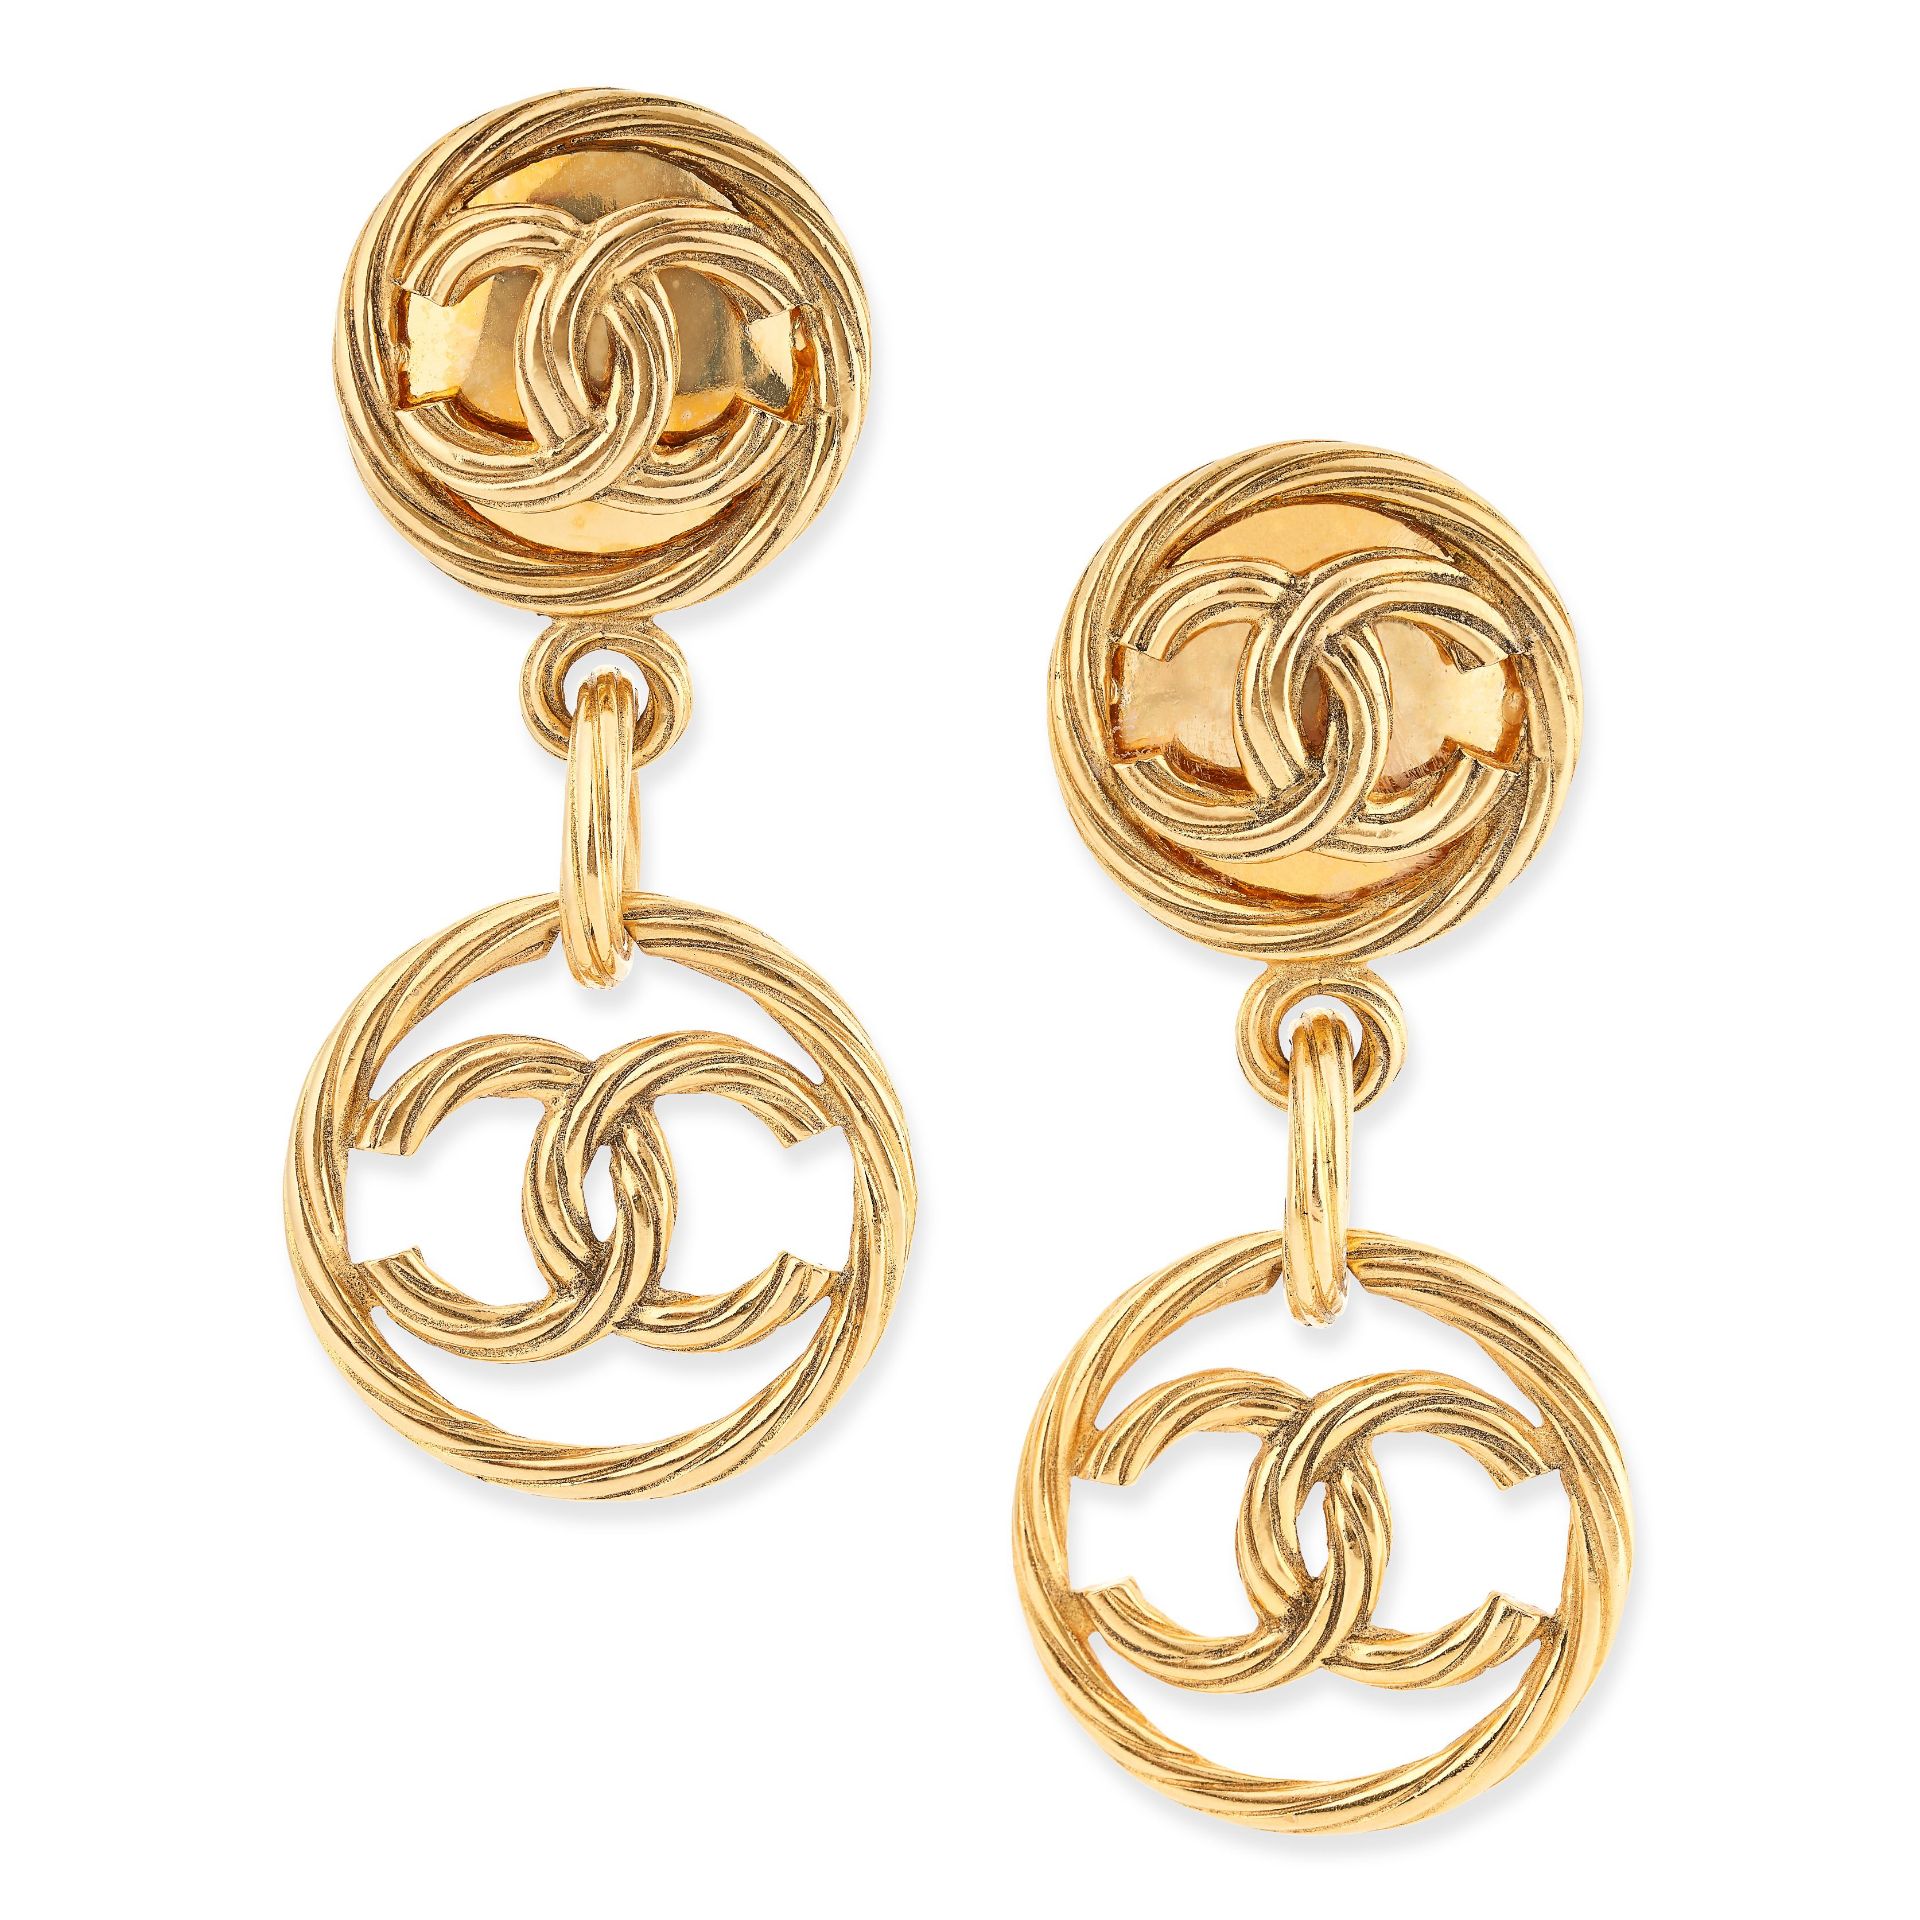 CHANEL, A PAIR OF VINTAGE CC DROP EARRINGS each comprising two interlocking CC motifs within twisted